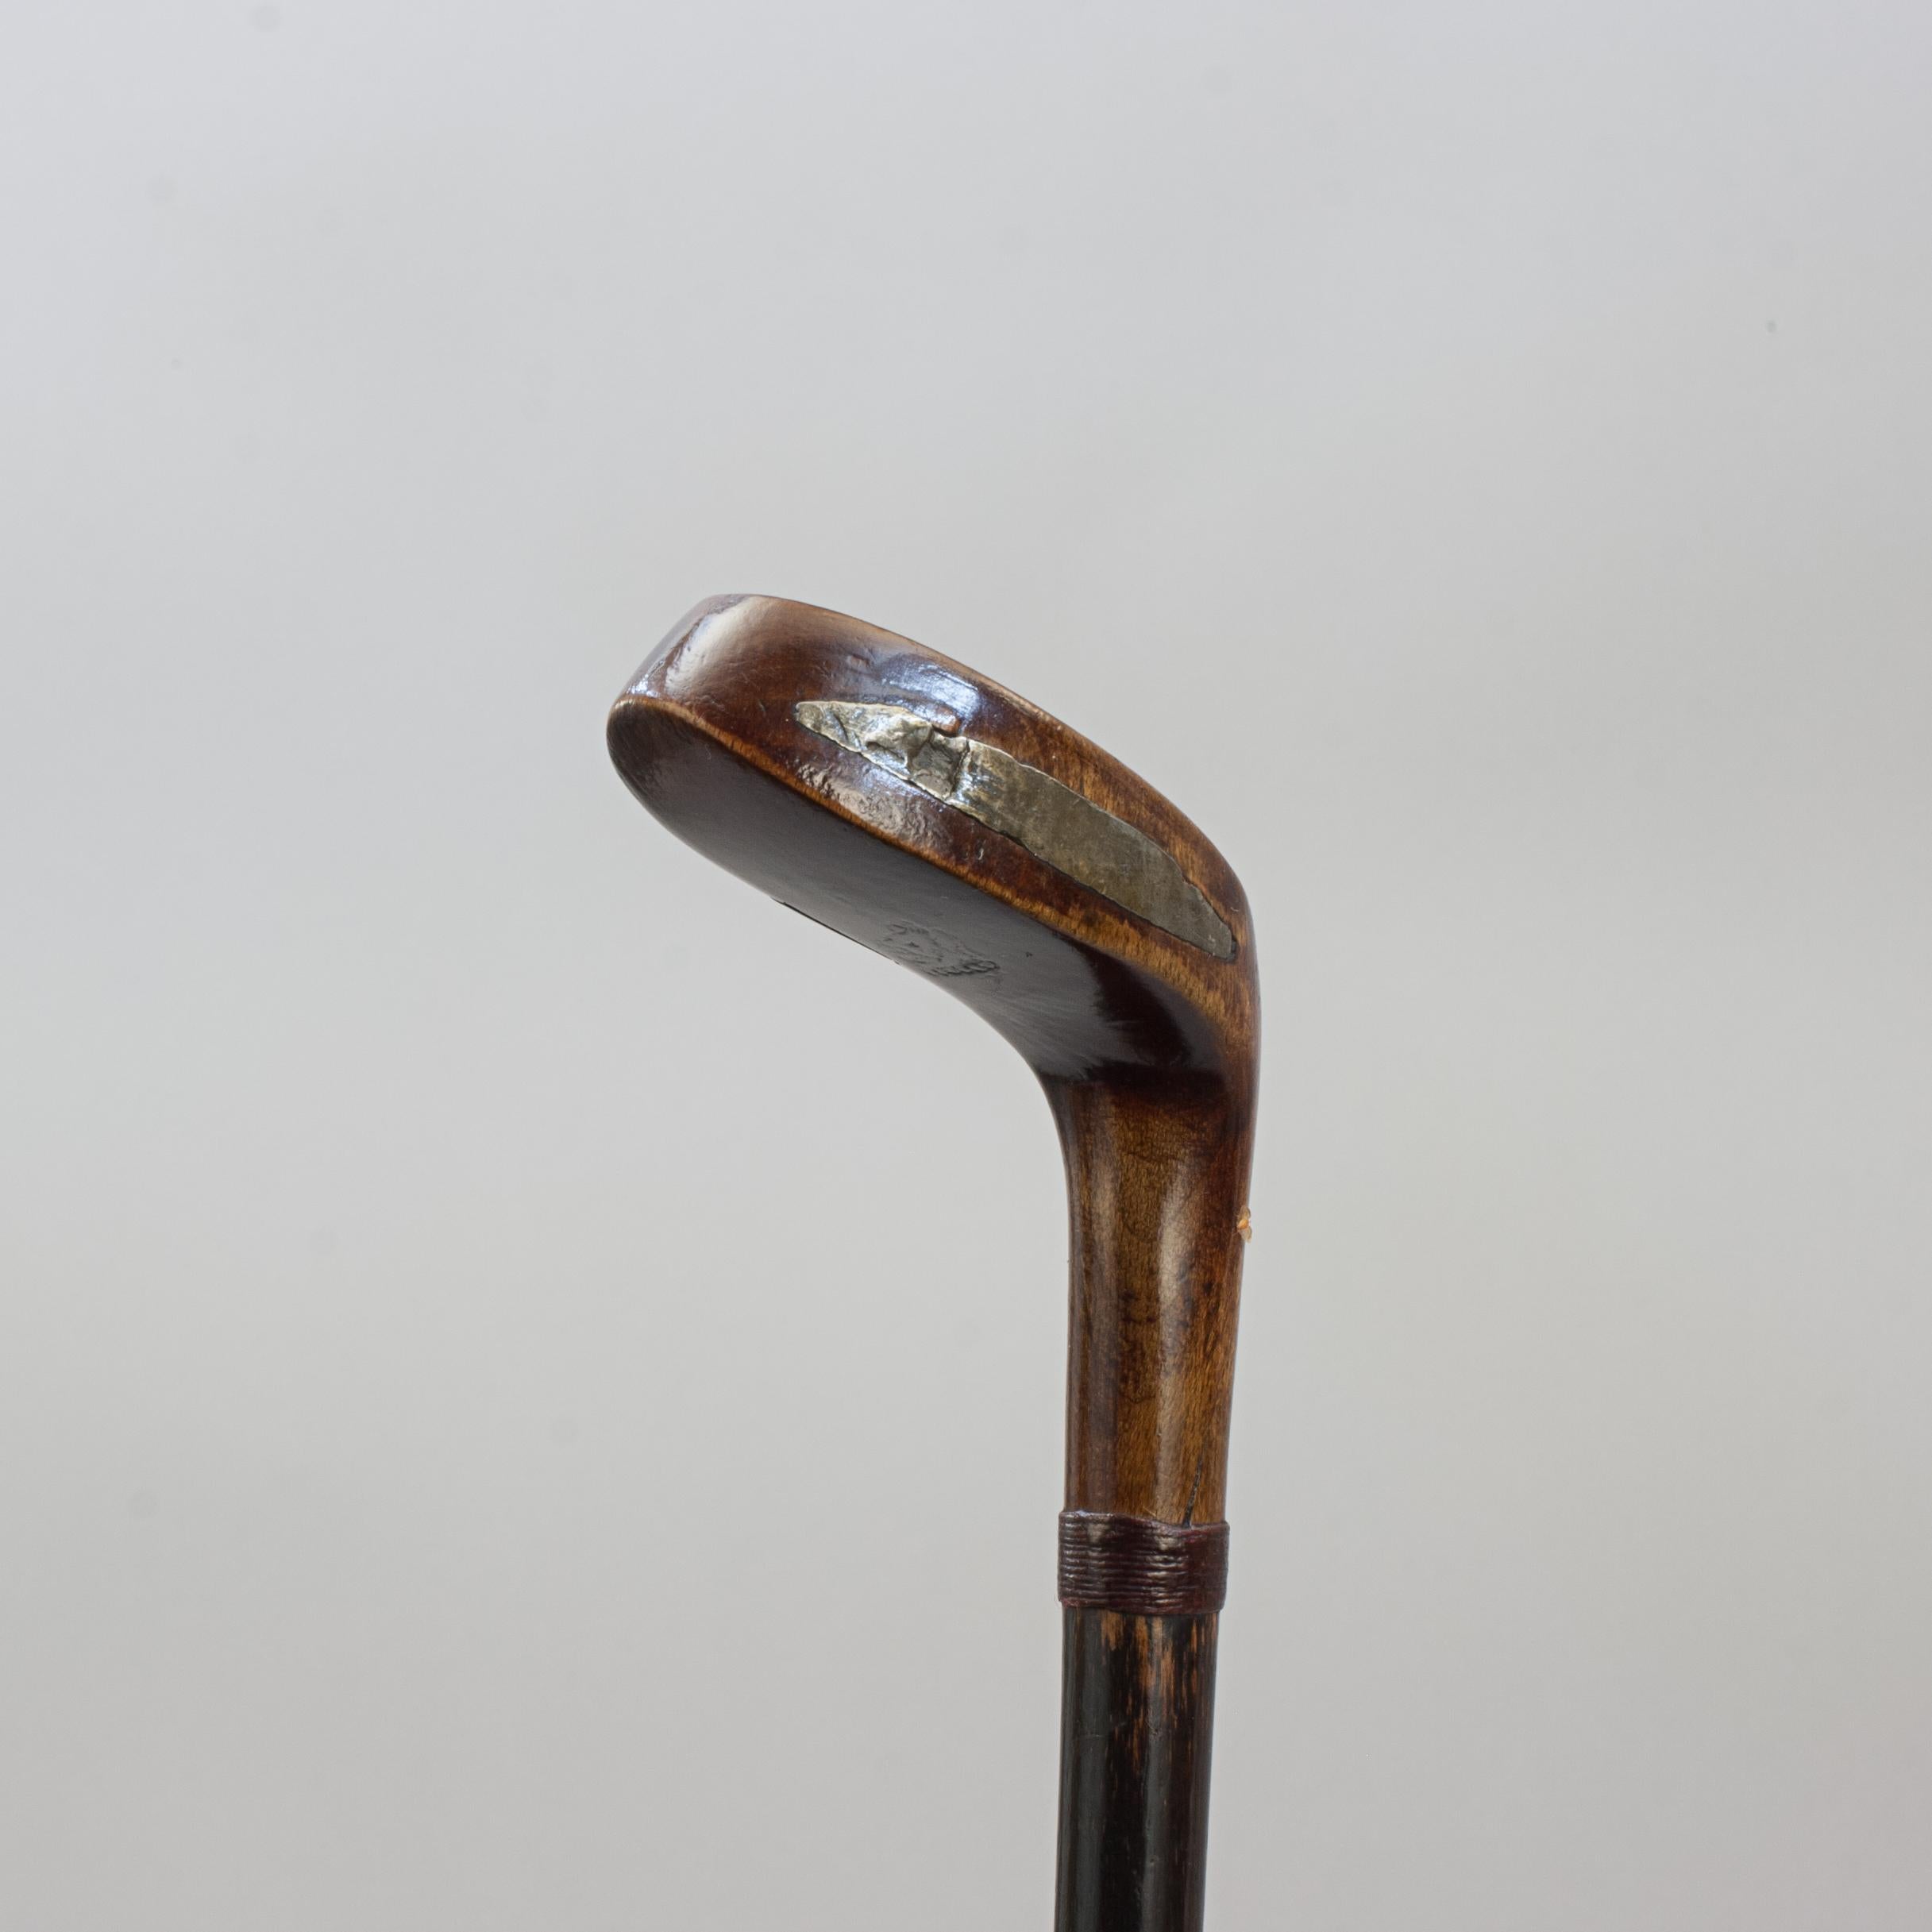 Antique Sunday Club, Golf Club Walking Stick.
A desirable walking cane with the handle in the shape of a golf club head. The gentleman's walking stick has a beechwood socket head handle with a pegged face insert and a lead weight to the rear. It is